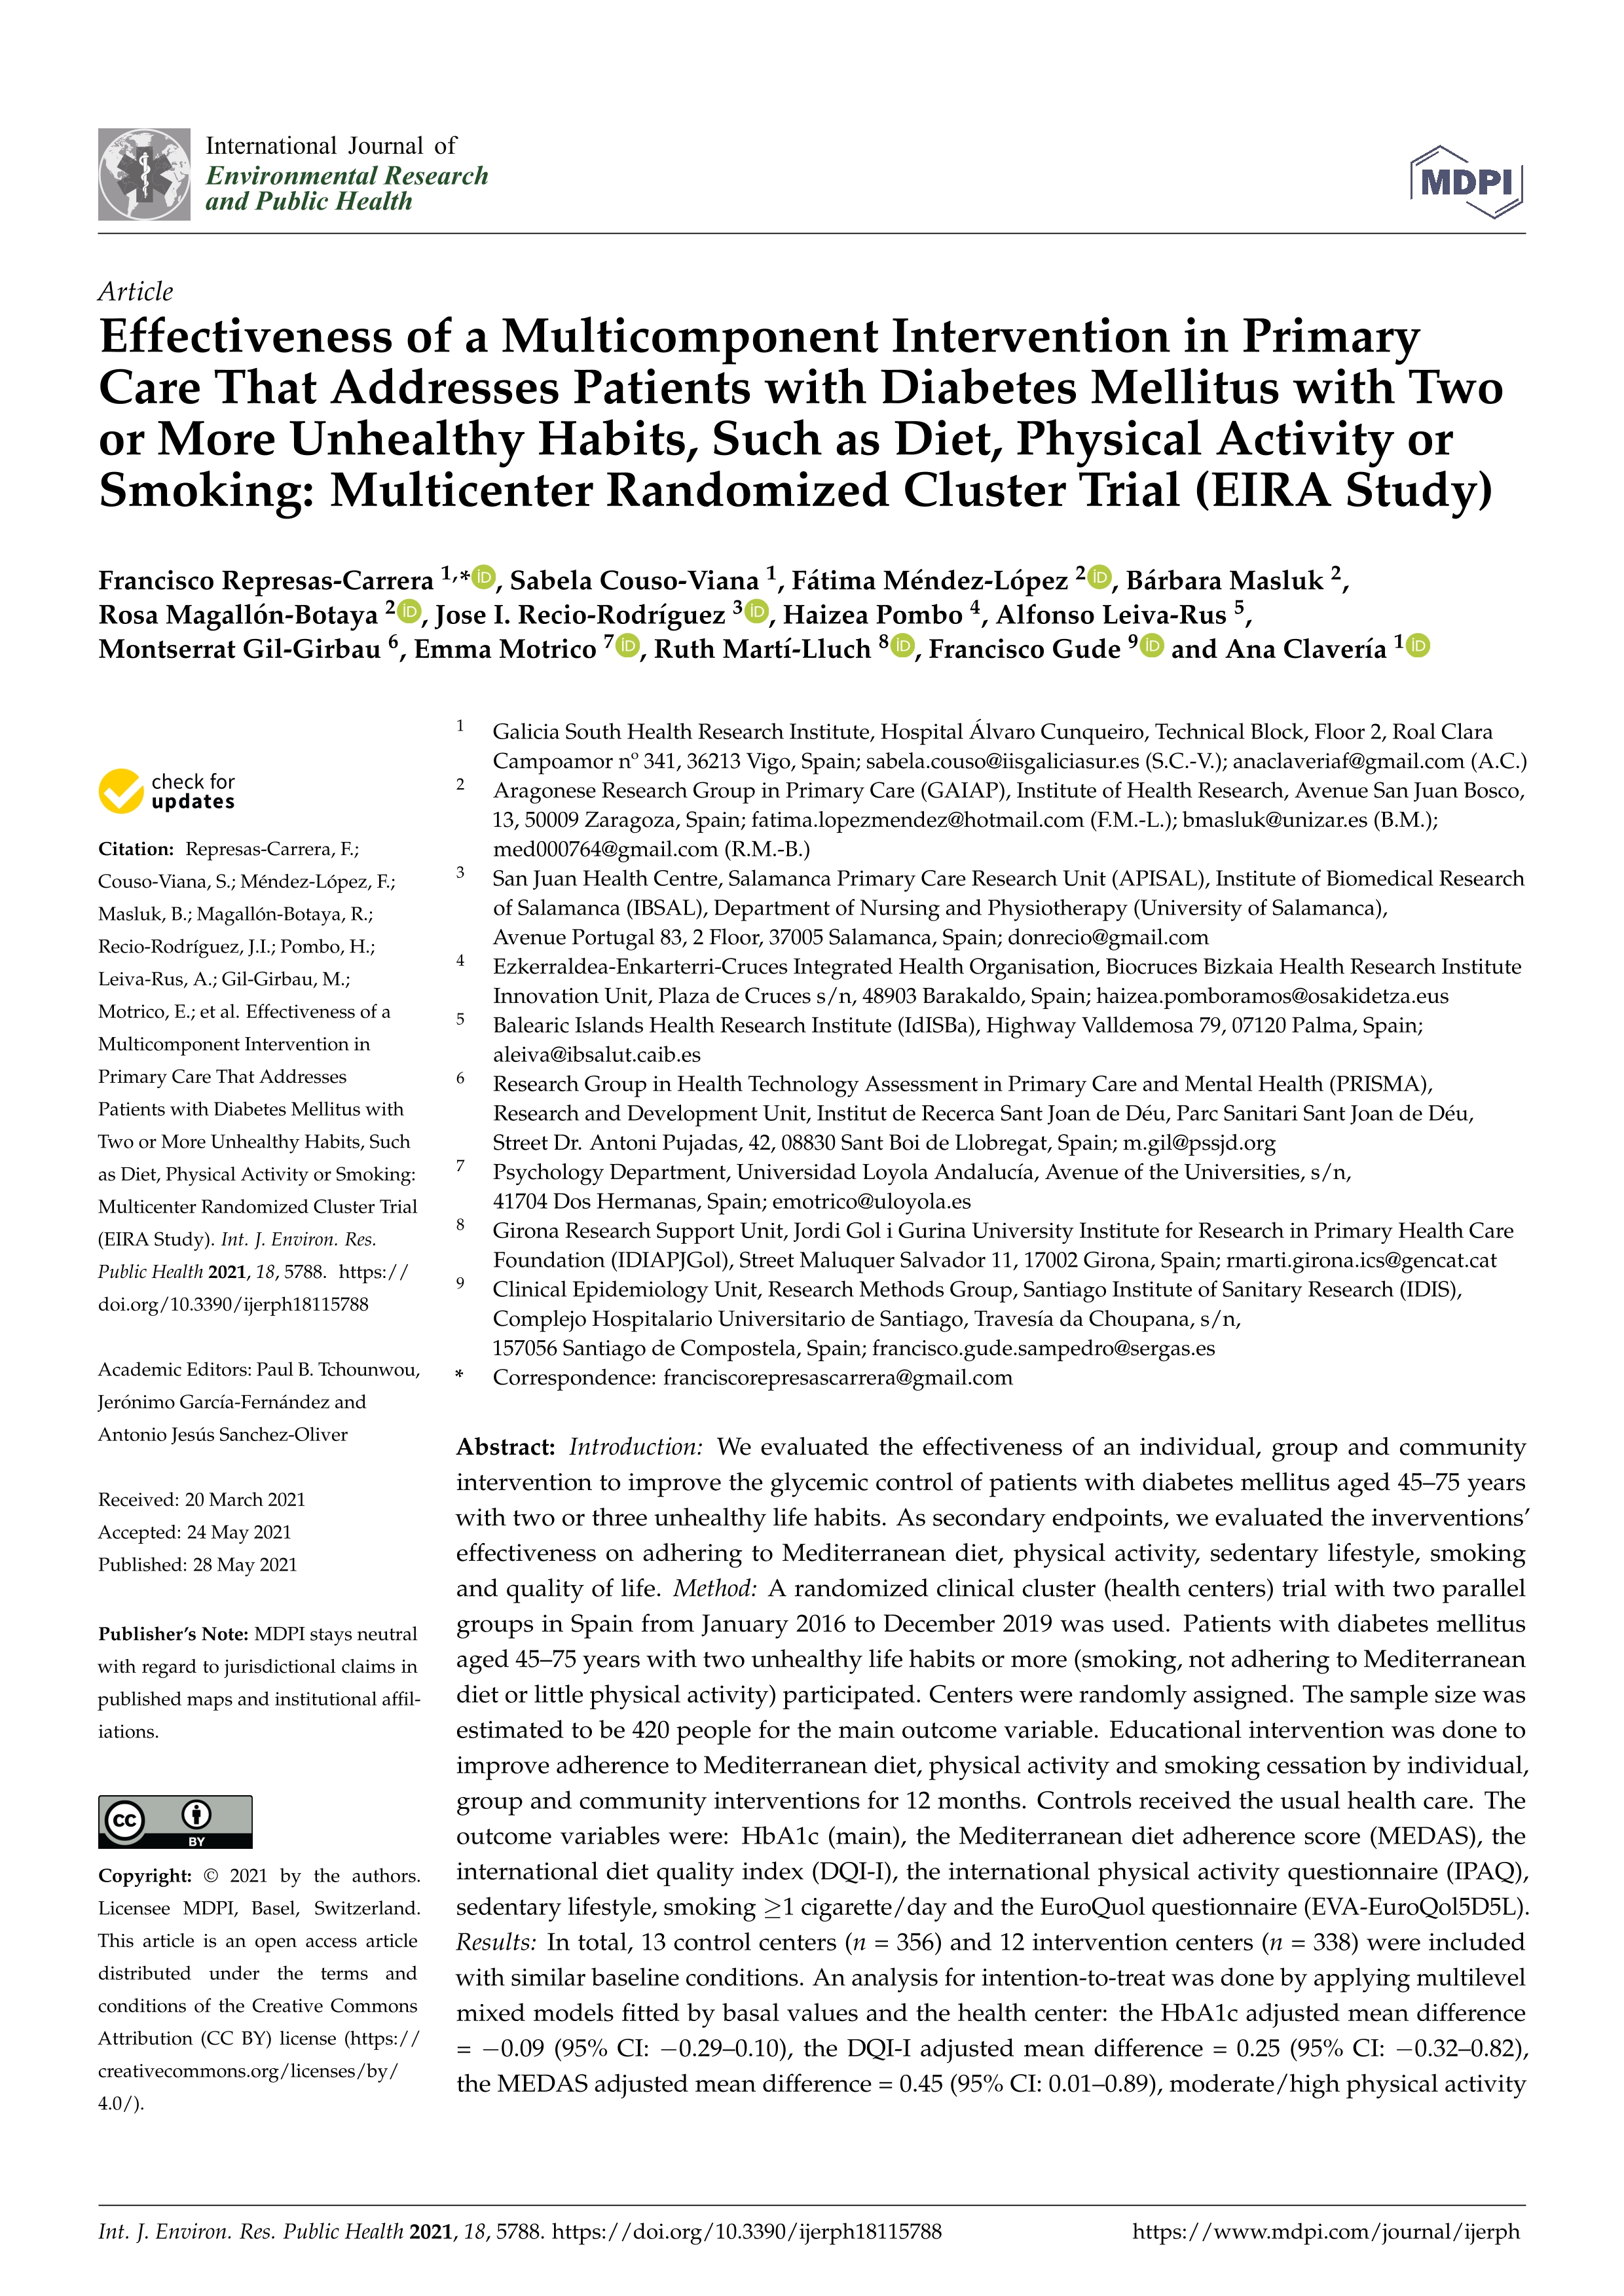 Effectiveness of a Multicomponent Intervention in Primary Care That Addresses Patients with Diabetes Mellitus with Two or More Unhealthy Habits, Such as Diet, Physical Activity or Smoking: Multicenter Randomized Cluster Trial (EIRA Study)